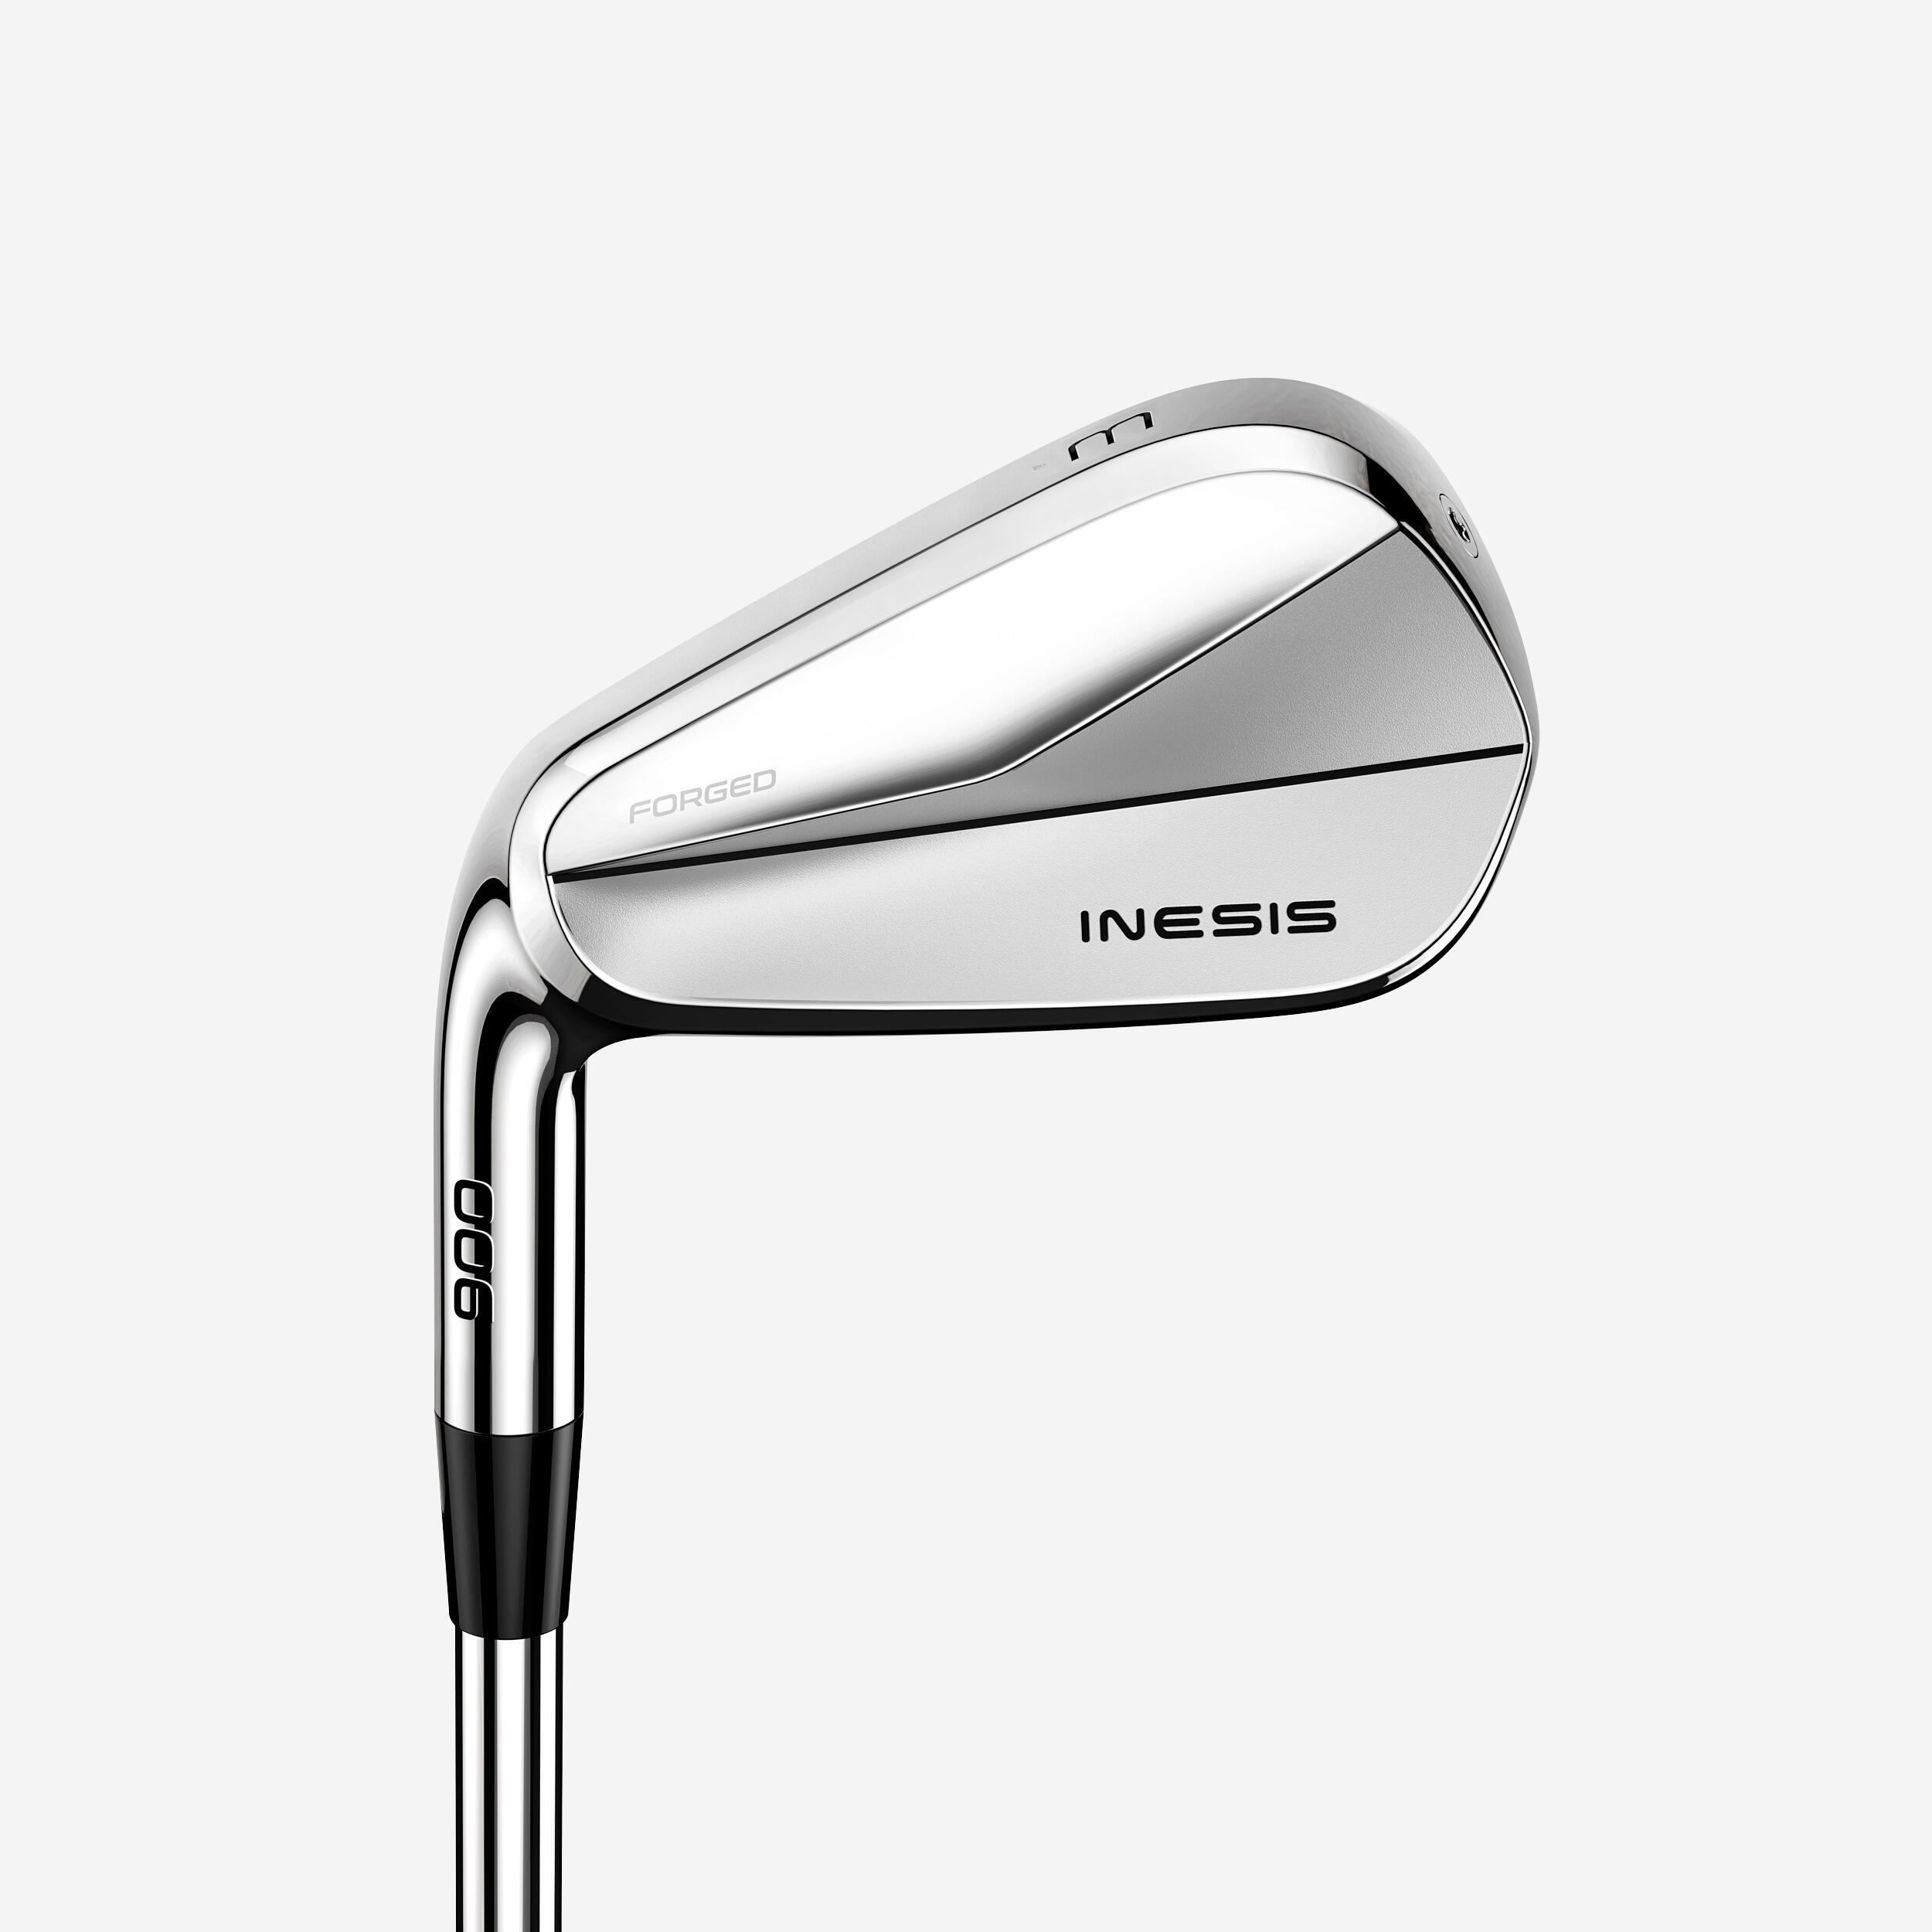 INESIS GOLF UTILITY IRON RIGHT HANDED GRAPHITE SIZE 2 LOW SPEED - INESIS 900